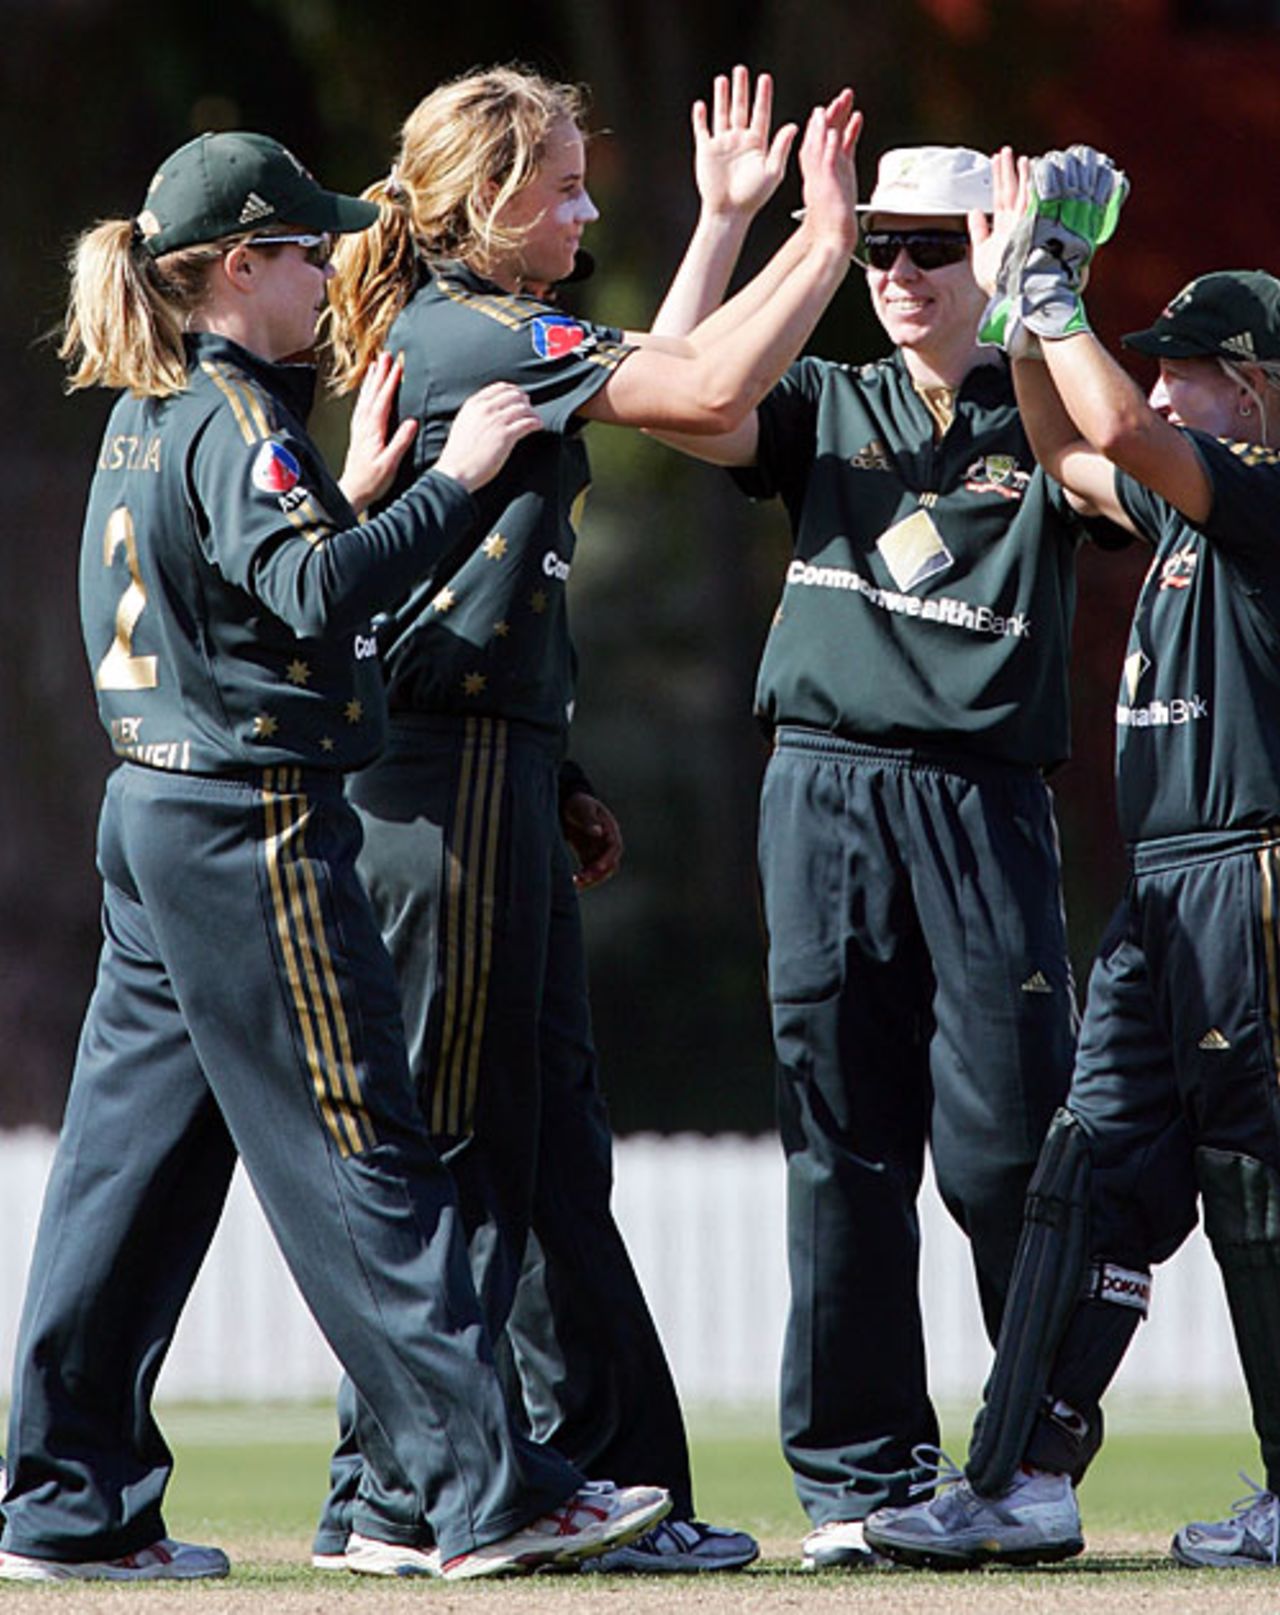 Ellyse Perry celebrates a wicket with her team-mates, New Zealand women v Australia women, 4th ODI, Rose Bowl, Lincoln, March 15, 2008